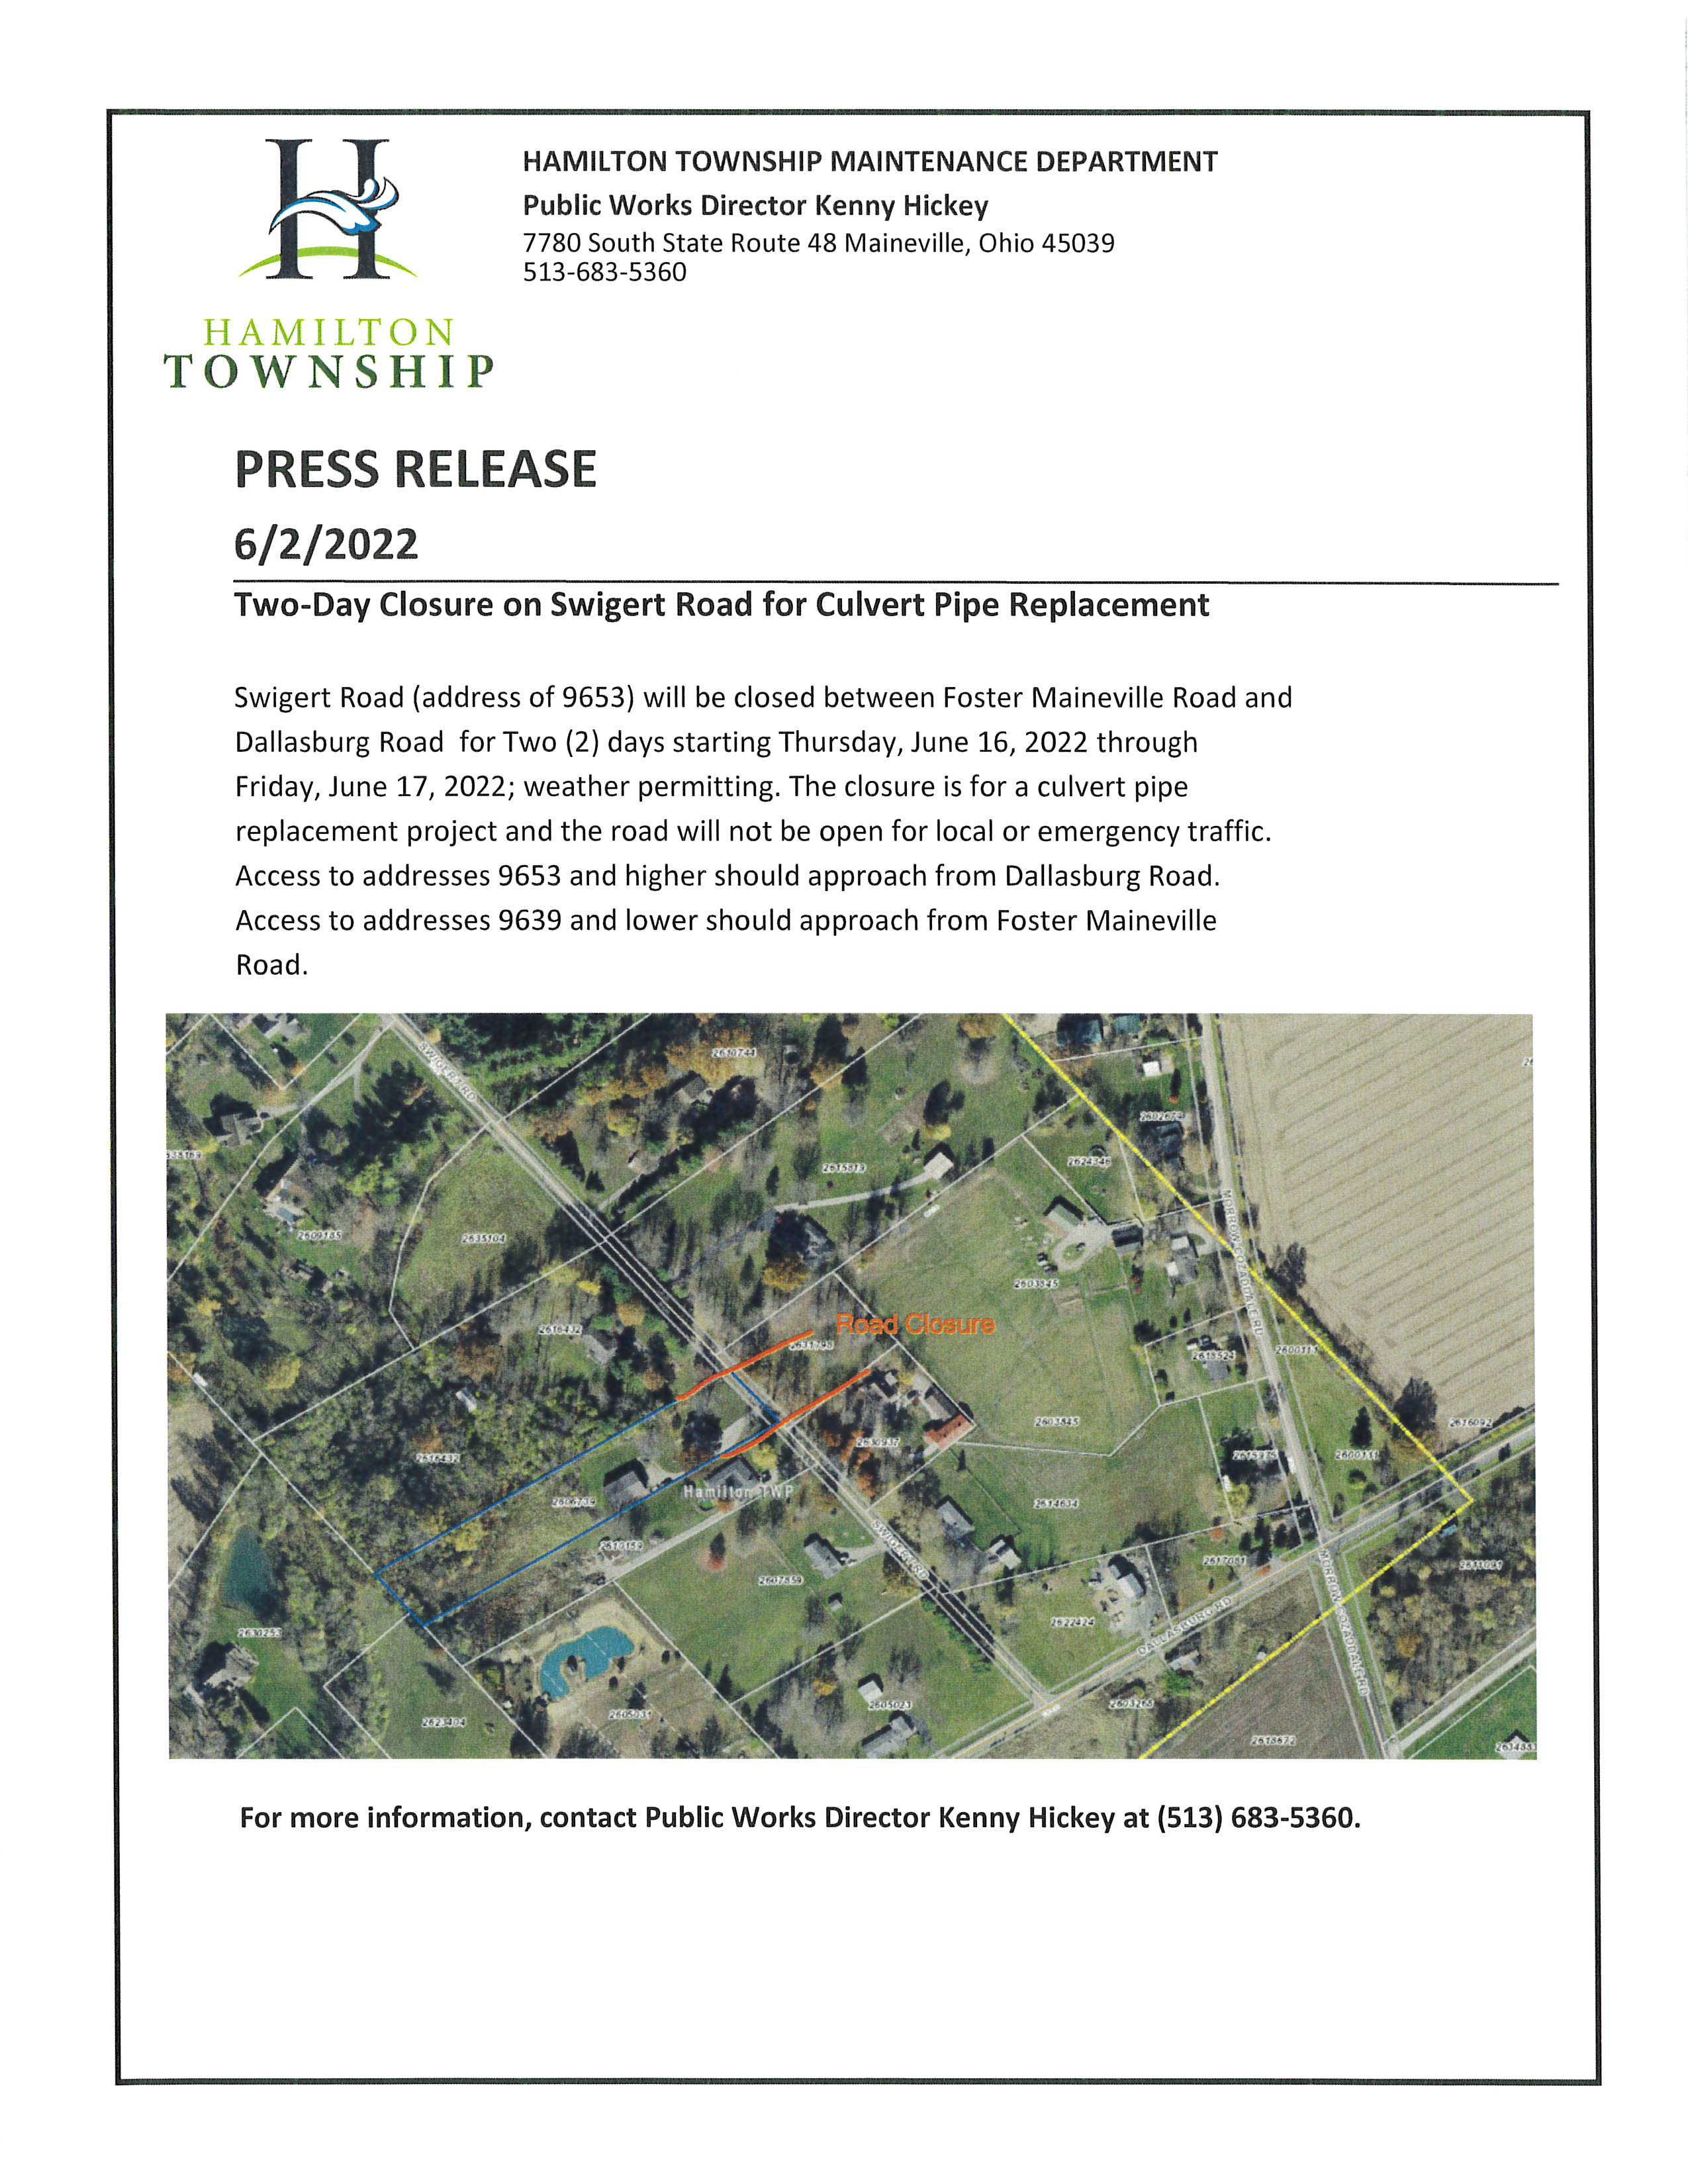 Two-Day Closure on Swigert Road Press Release